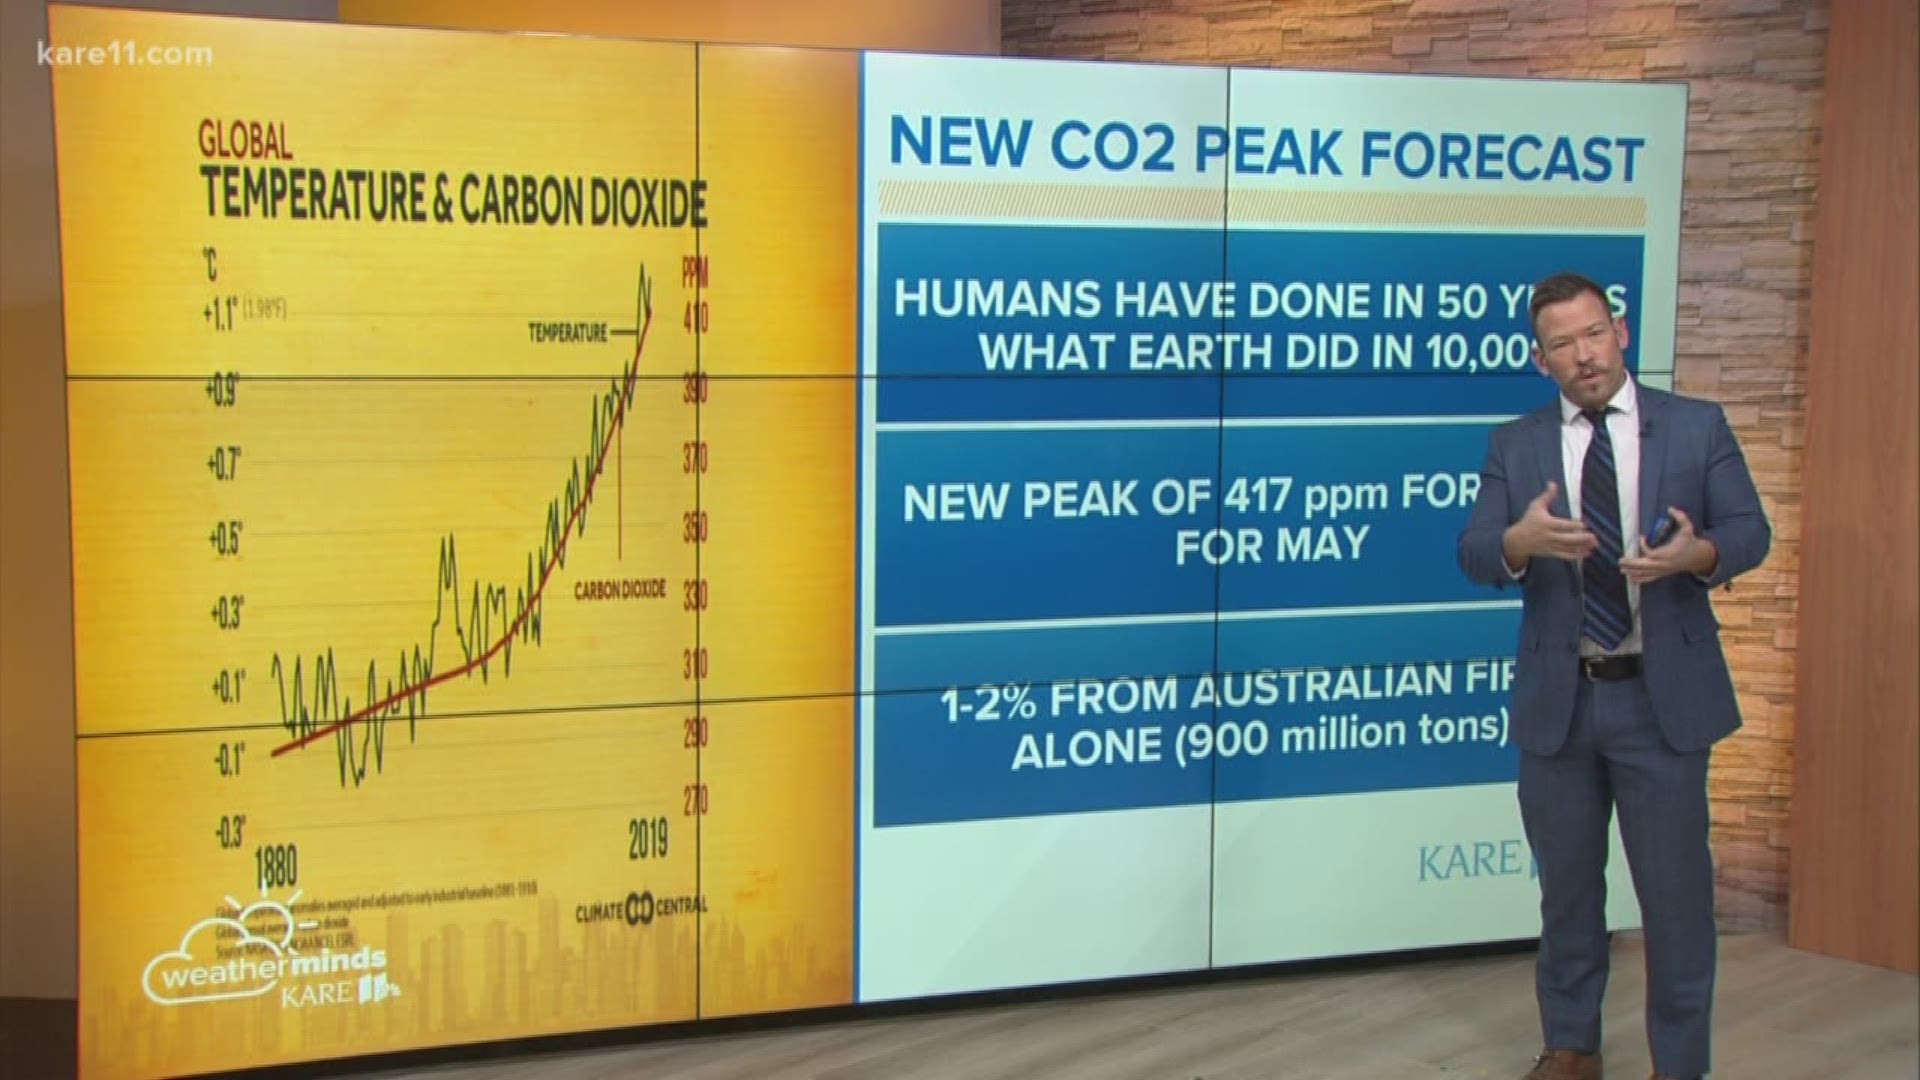 Carbon dioxide is increasing in the Earth's atmosphere, and experts are anticipating hitting a new high this year.